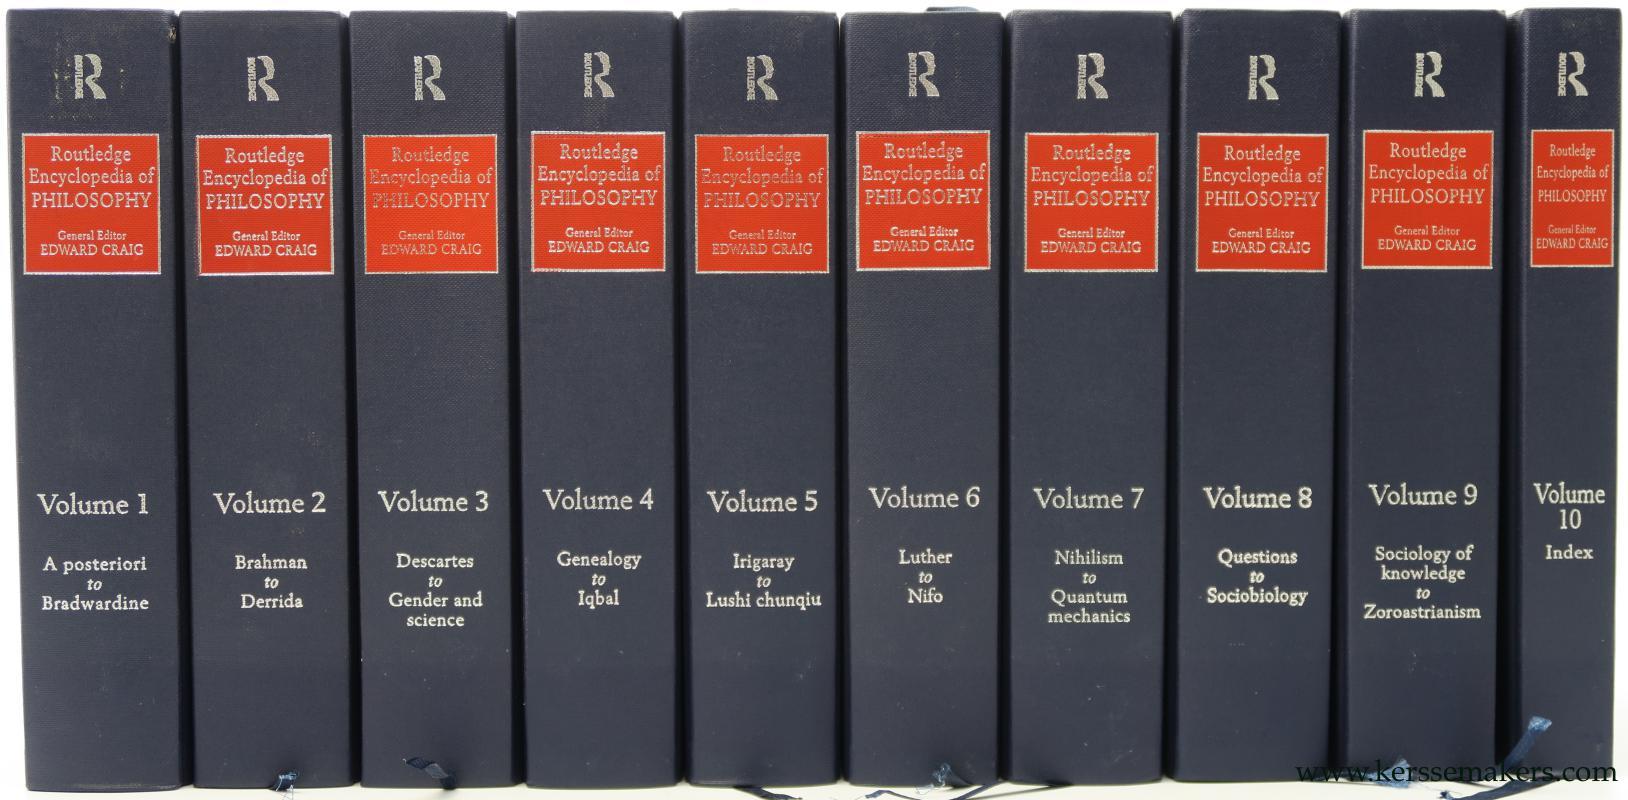 Routledge Encyclopedia of Philosophy [ complete set in 10 volumes ]. - Craig, Edward (ed.).